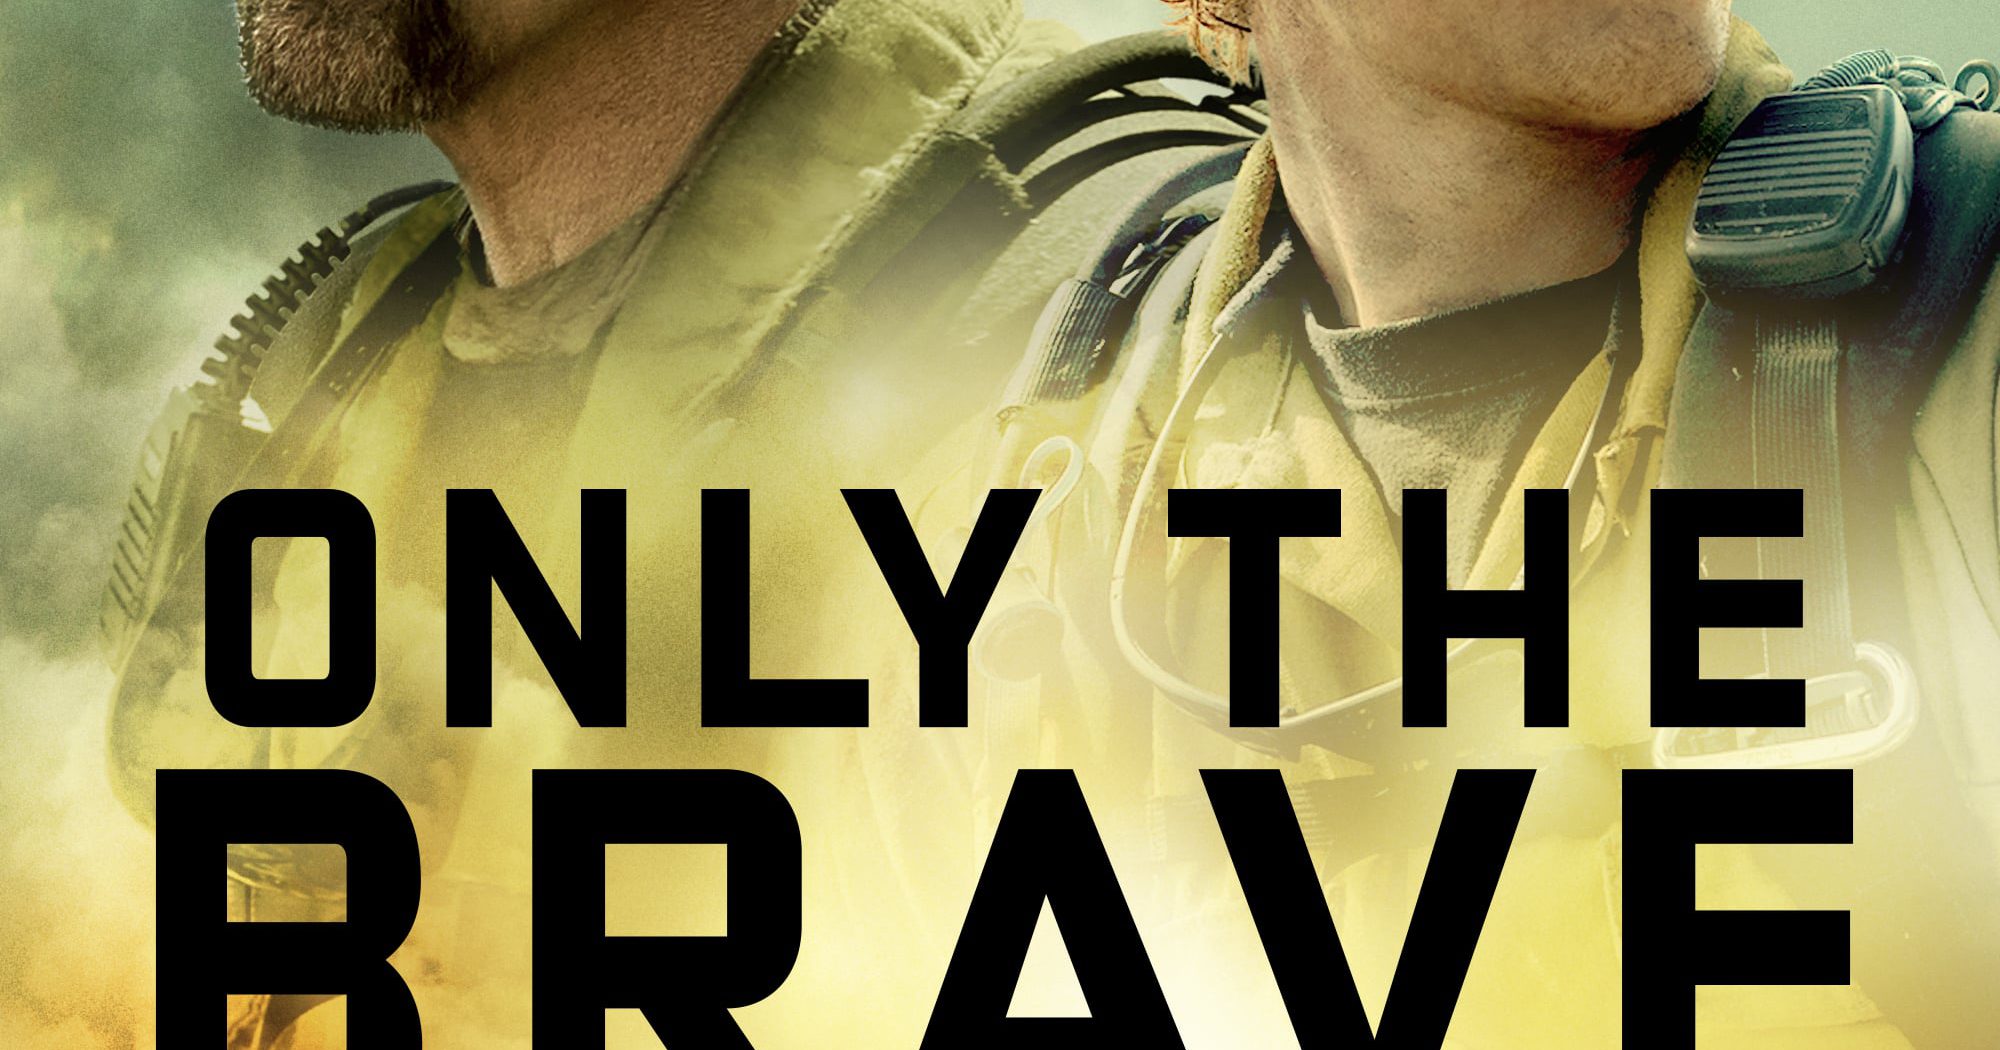 Poster for the movie "Only the Brave"